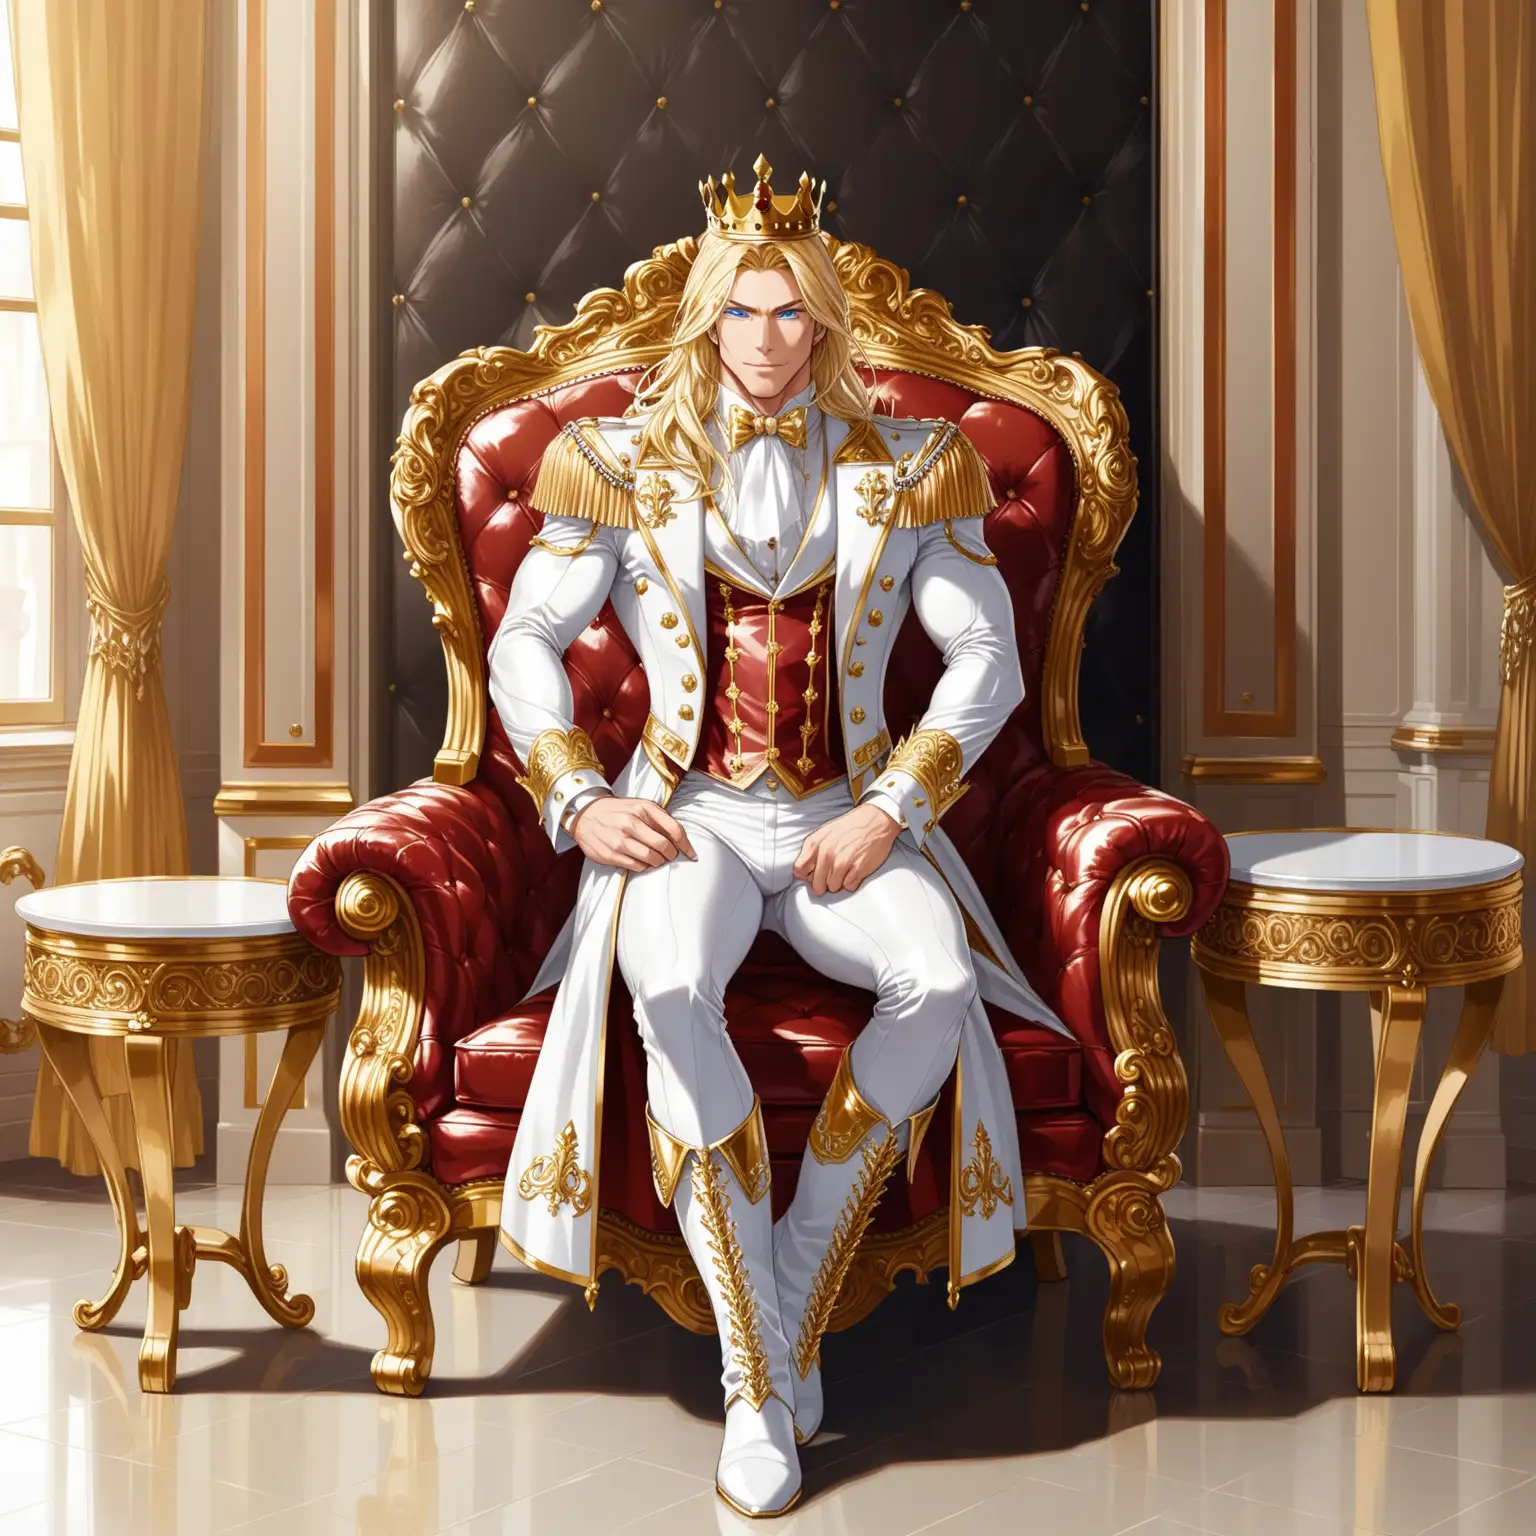 Handsome King in Shiny White Latex Victorian Suit in Royal Palace